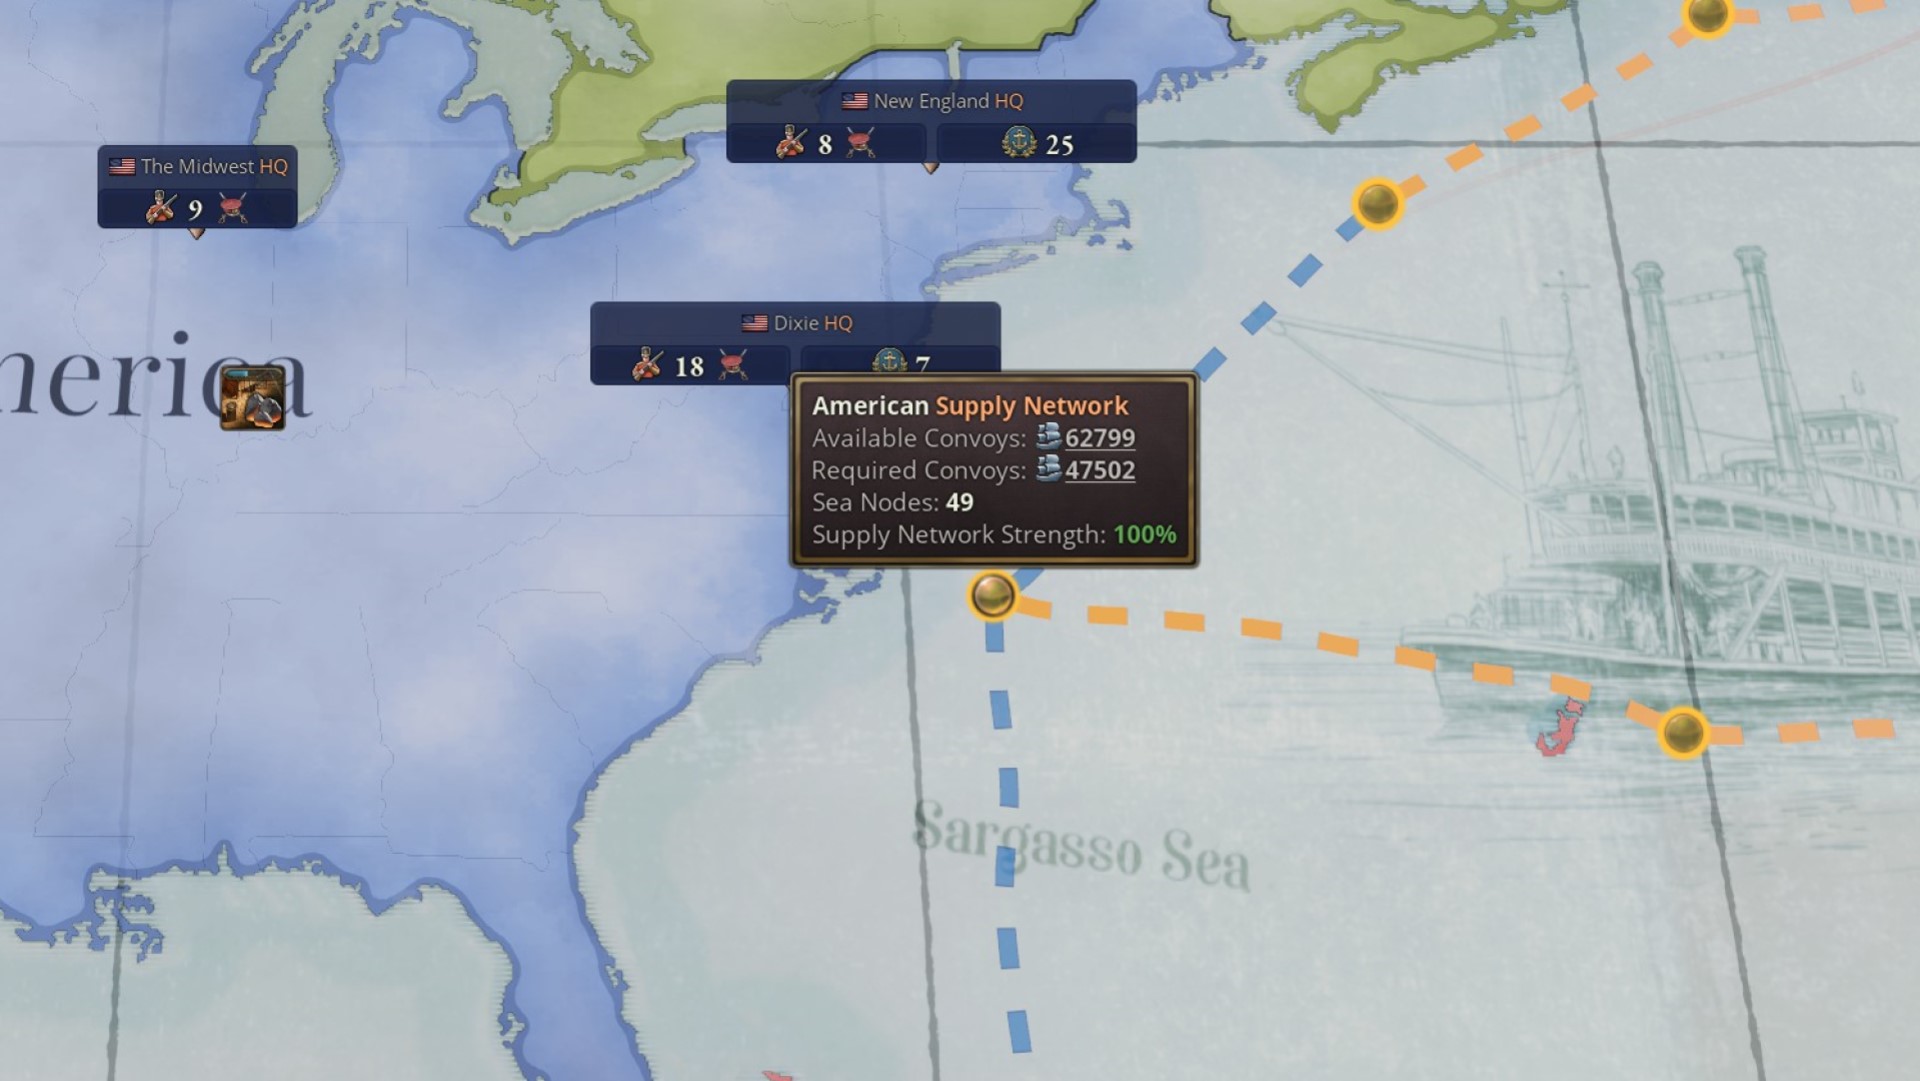 Victoria 3 trade guide: A node on the Atlantic coast of the United States shows the American supply network, including the number of available convoys